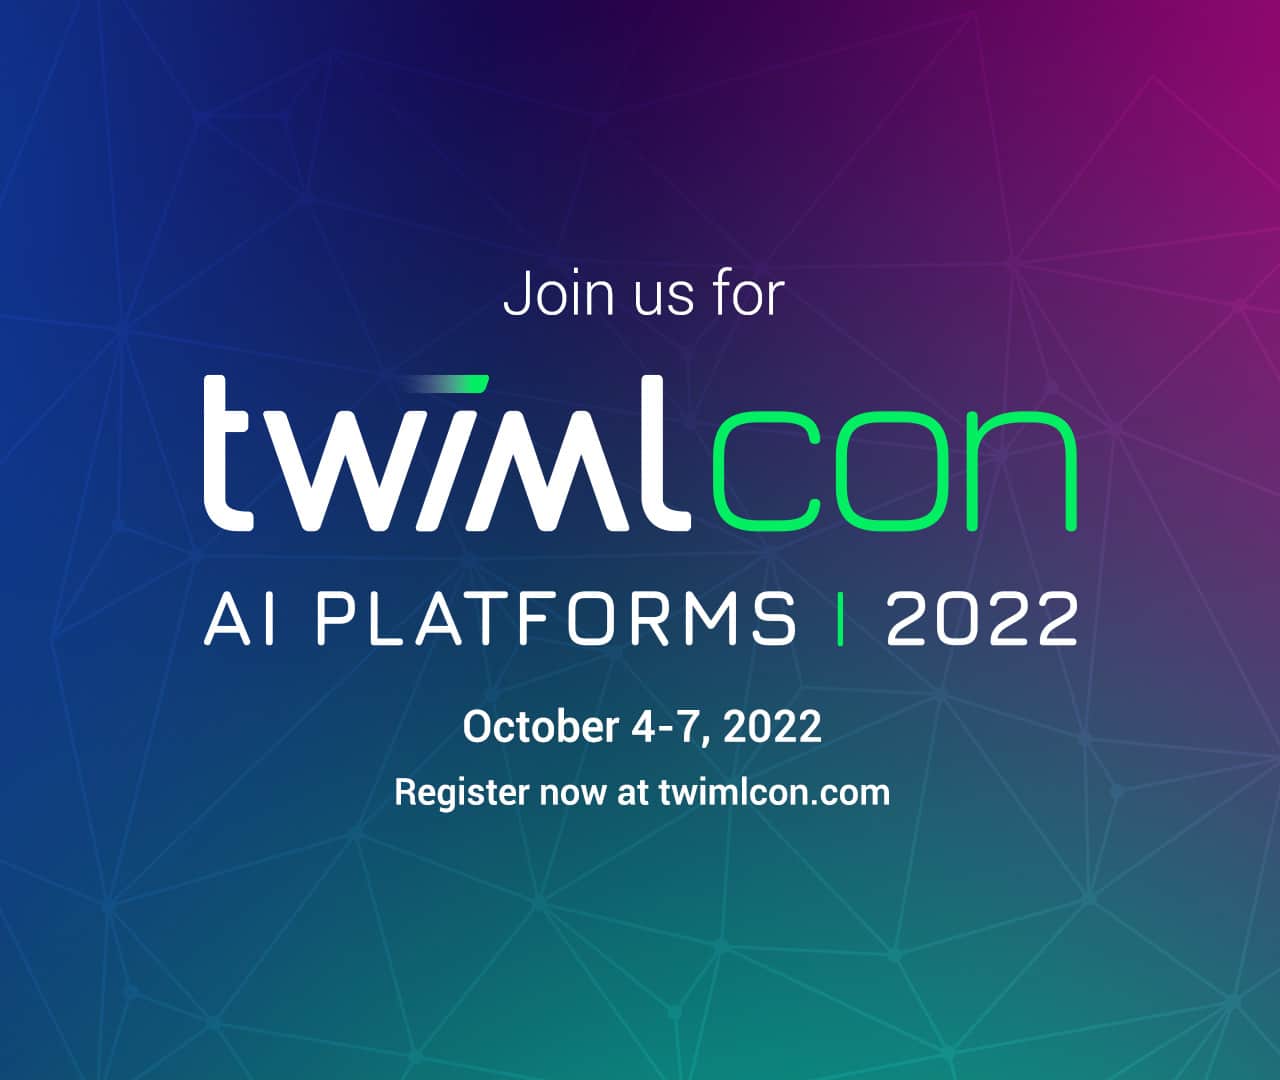 TWIMLcon Platform is Now Open - Register While You Can!